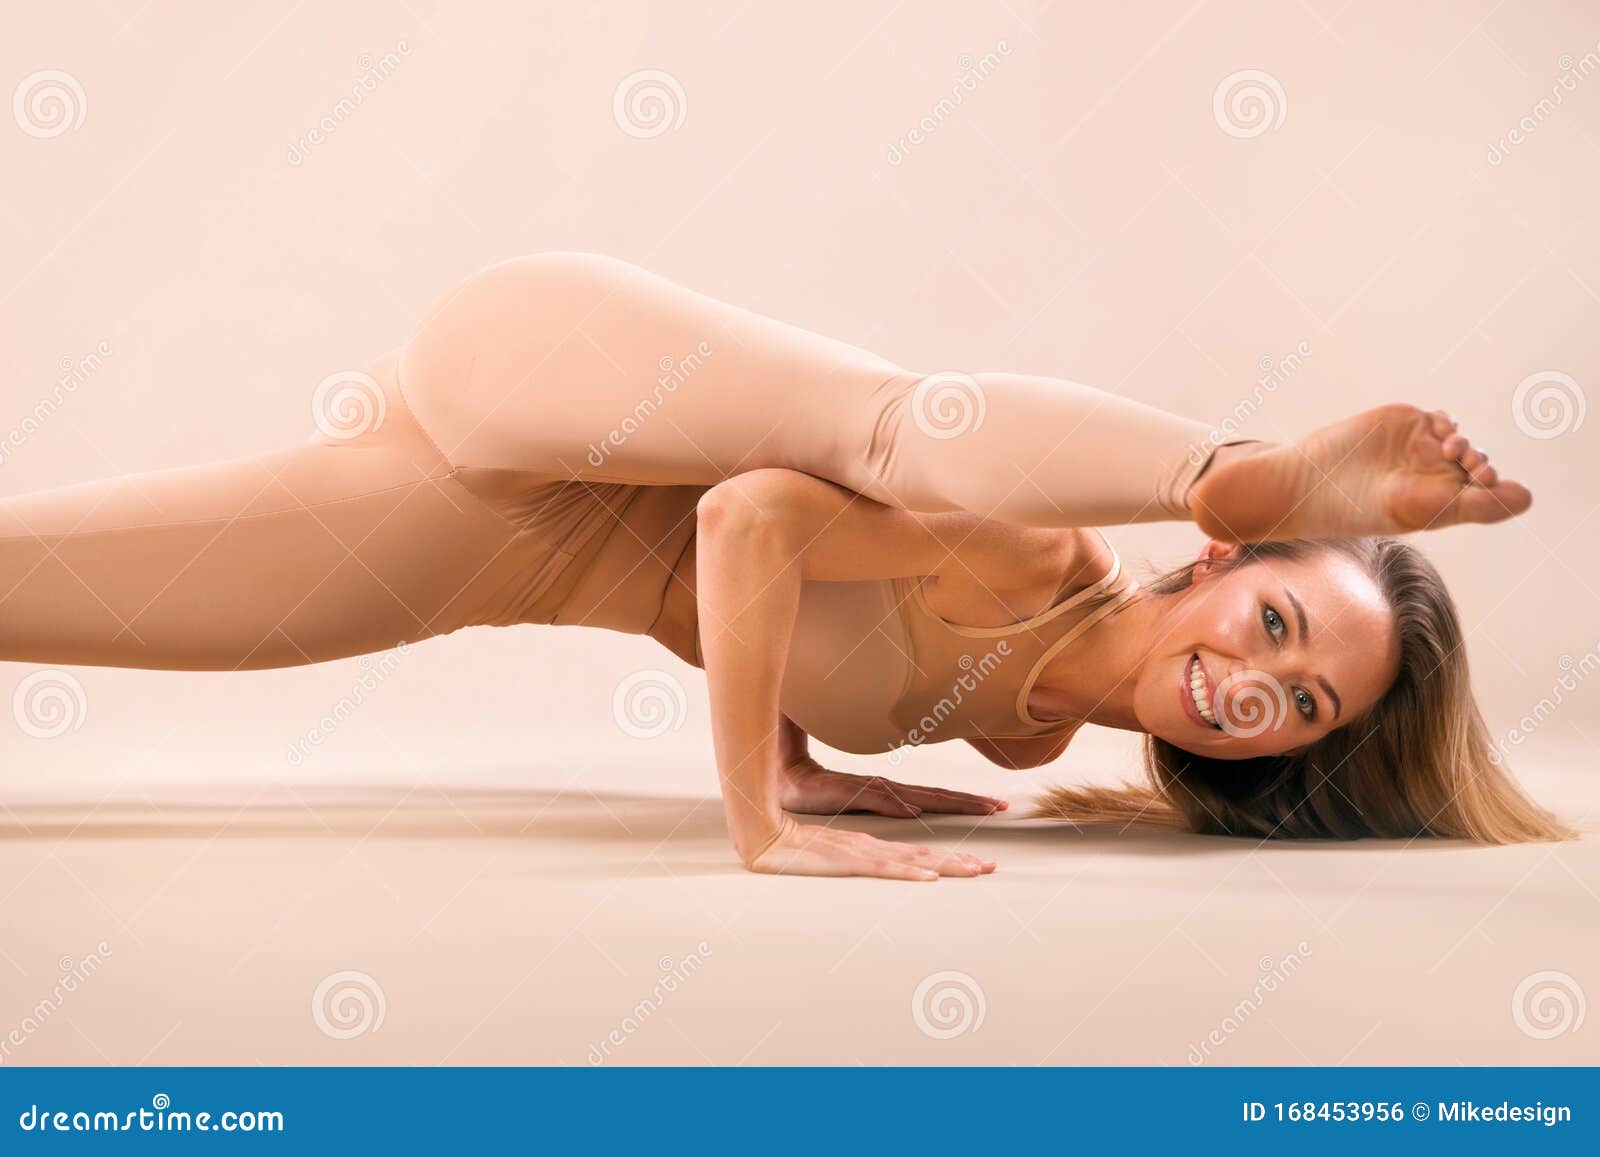 andrea easley recommends naked yoga for women pic